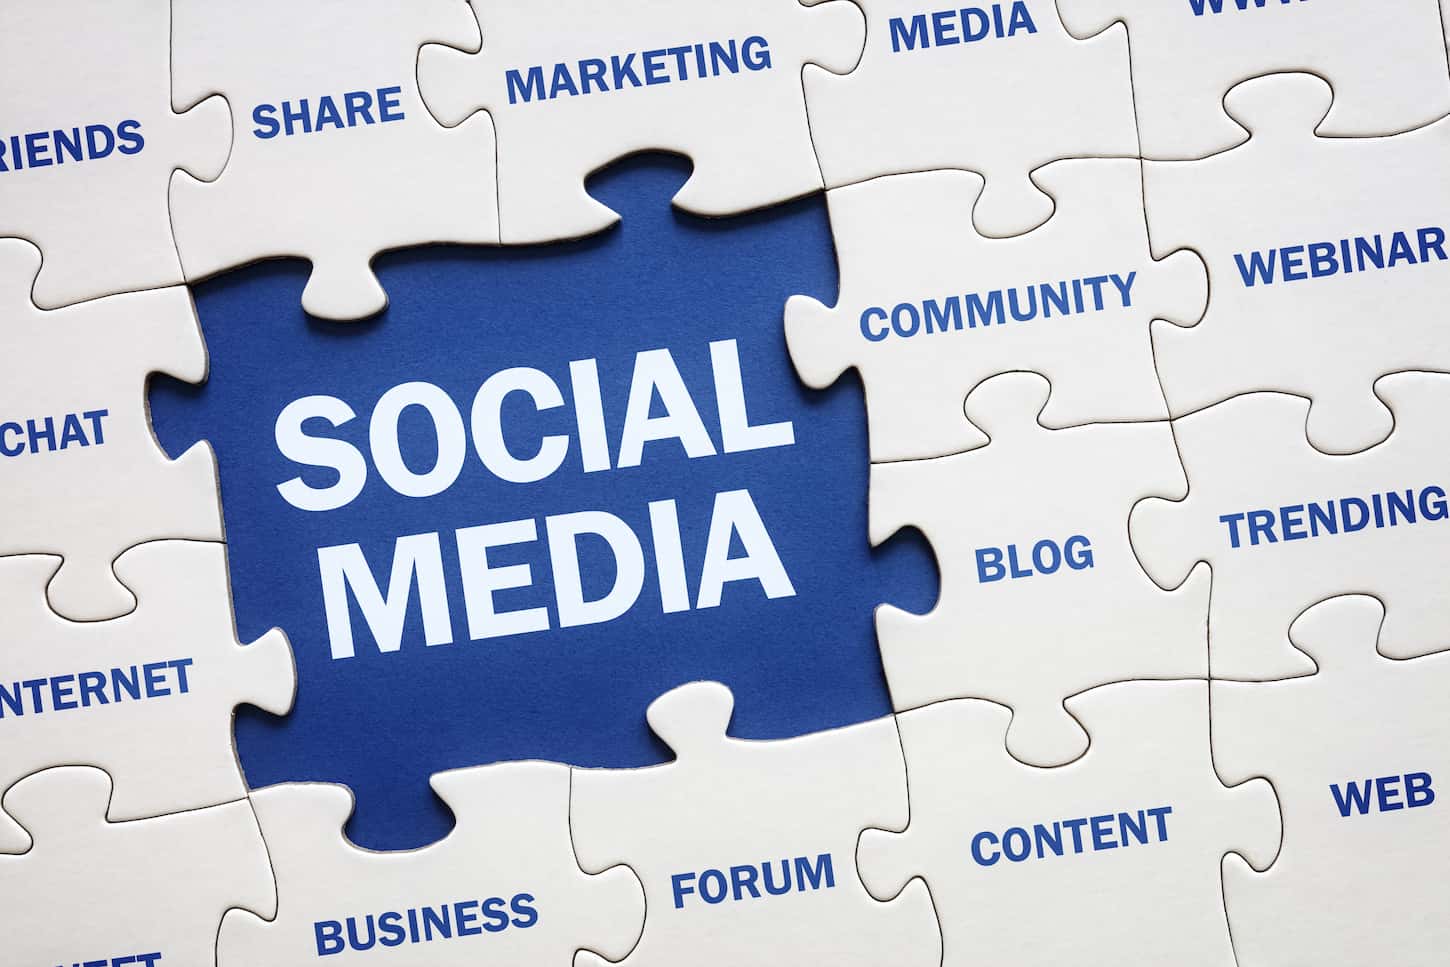 An image of a Social media concept jigsaw piece reading marketing, networking, community forums, internet, etc.